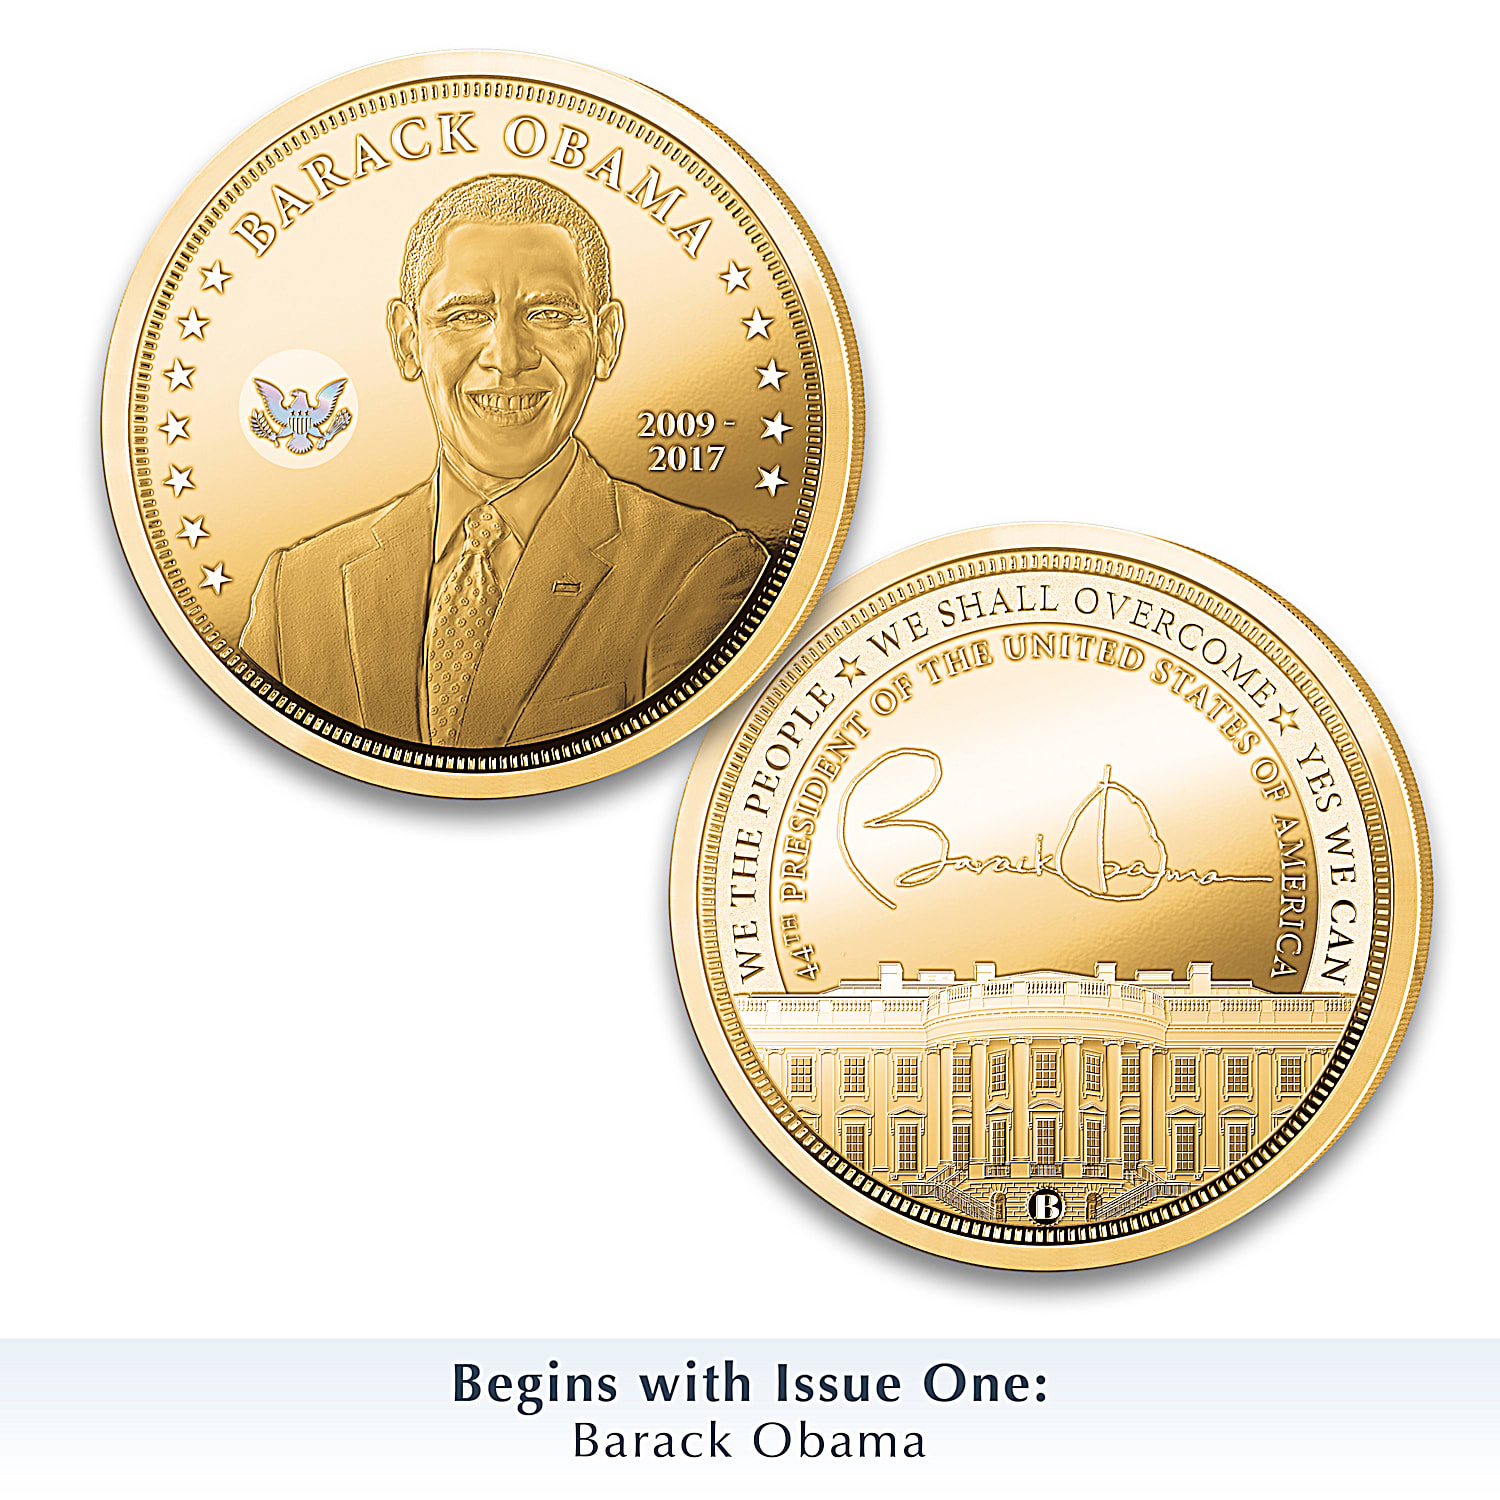 Obama inaugural coins a good investment?